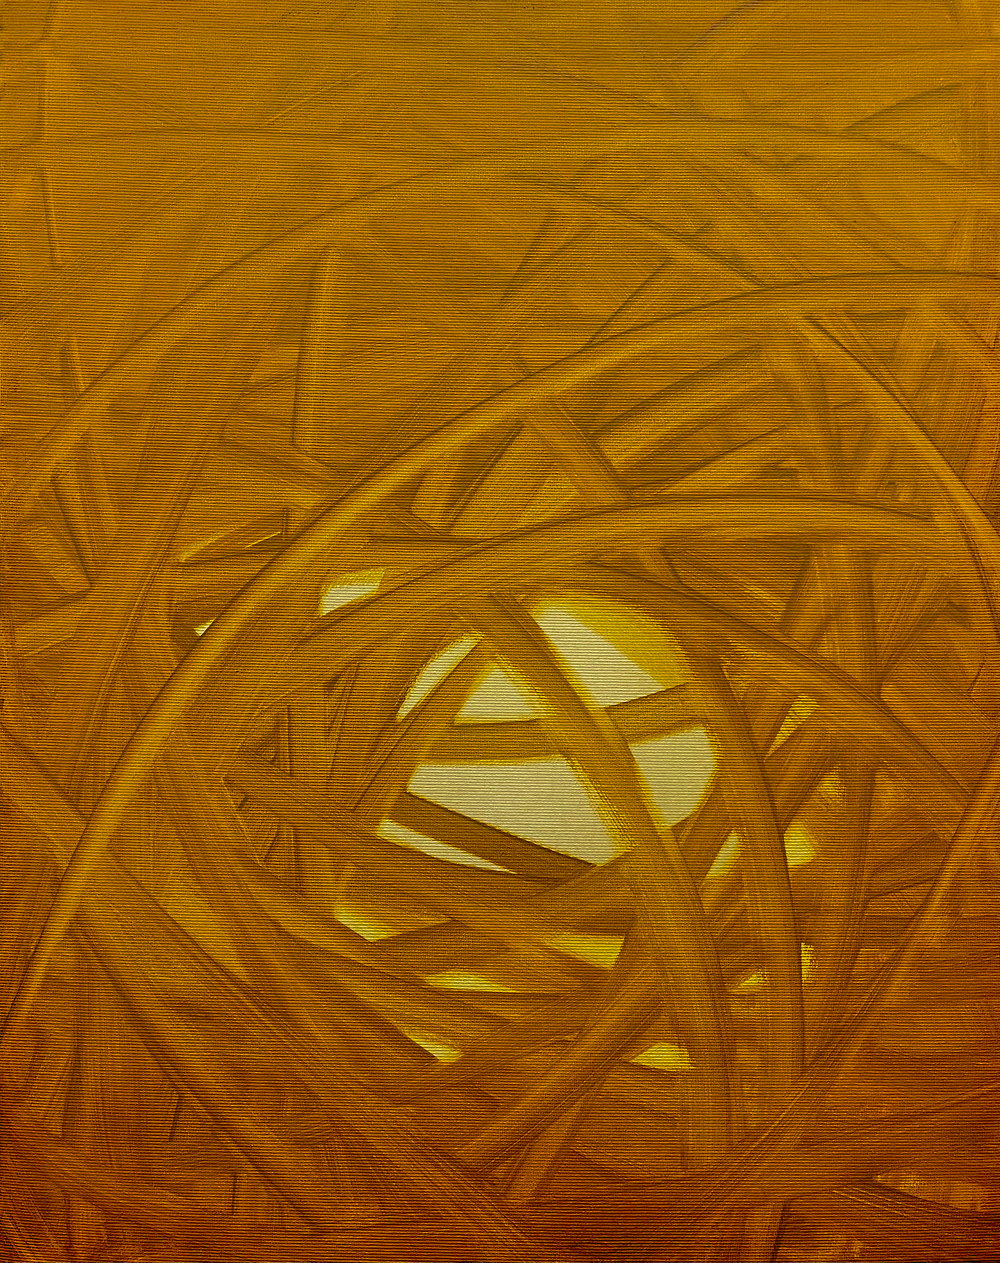 Image of Ochre structure - 50x40 cm, oil on canvas